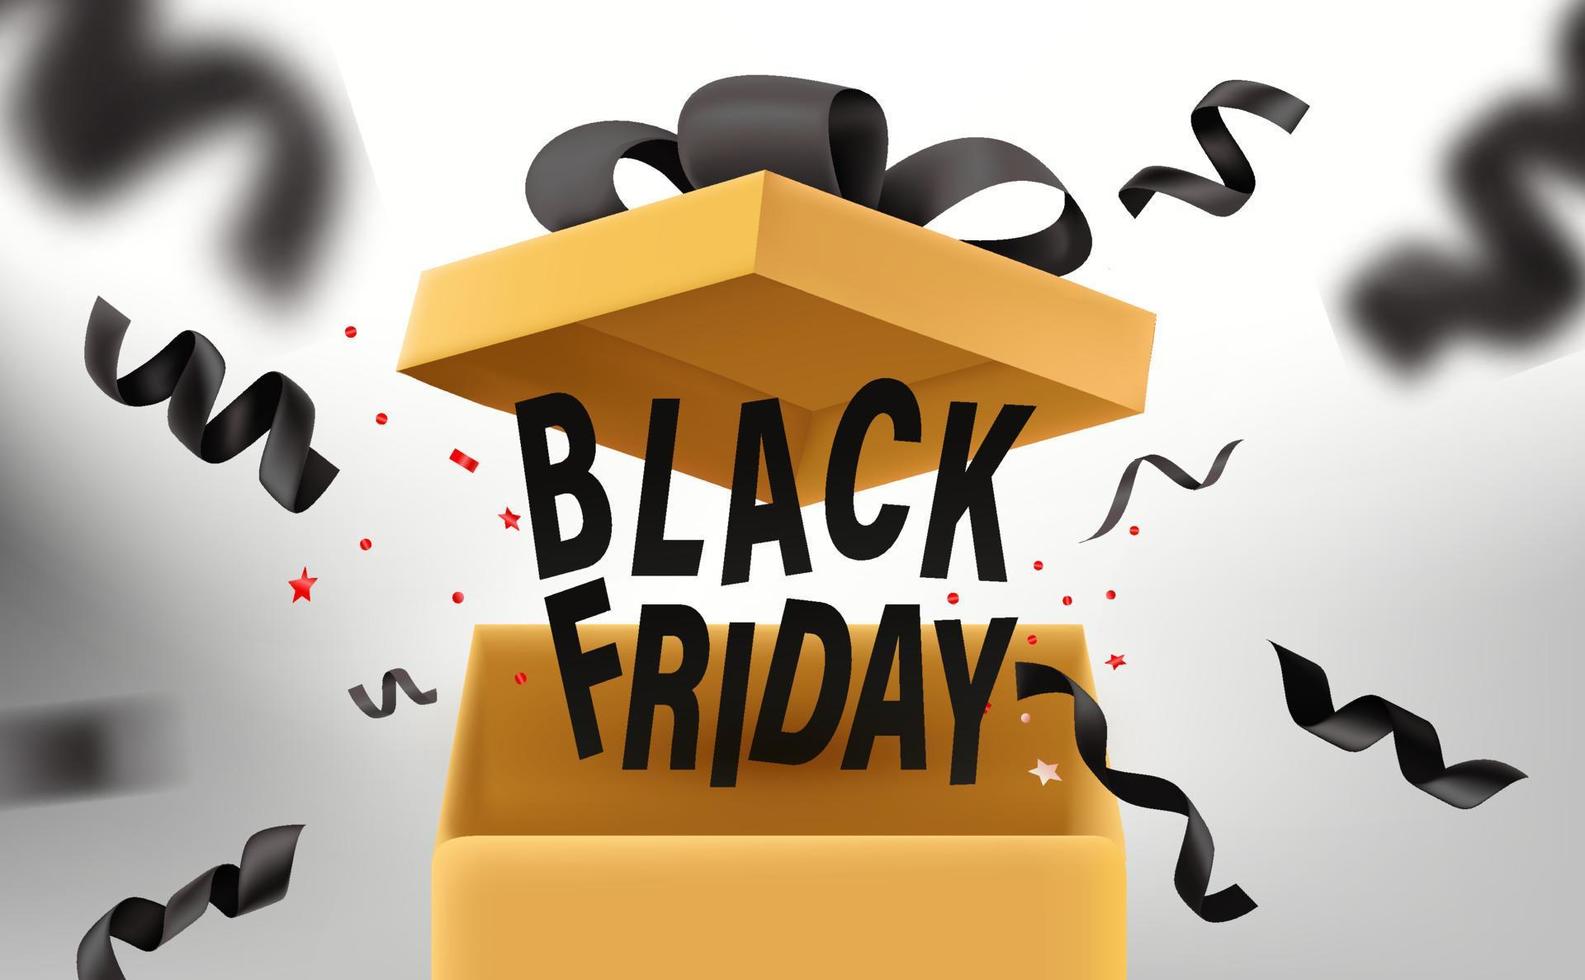 Black friday final sale vector banner with black ribbons and gift box